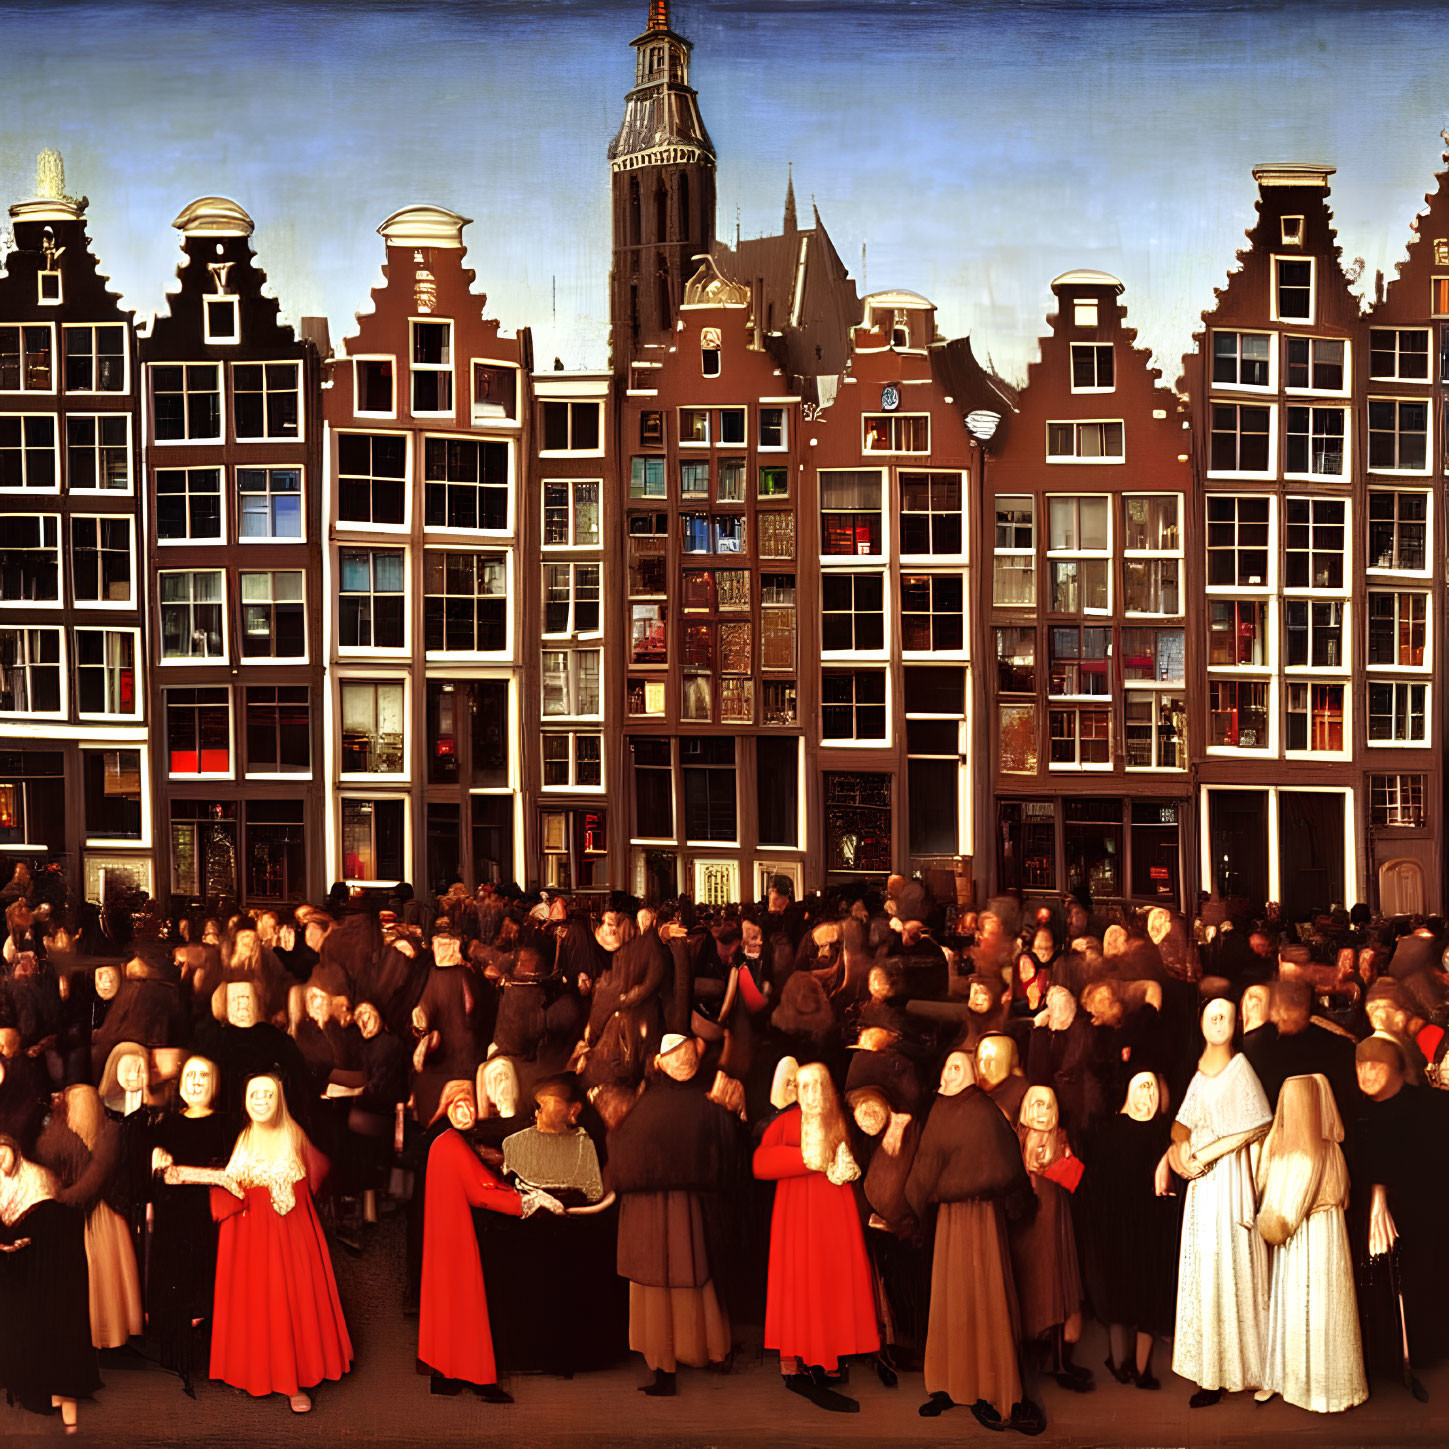 Dutch city square painting with period clothing and gabled houses